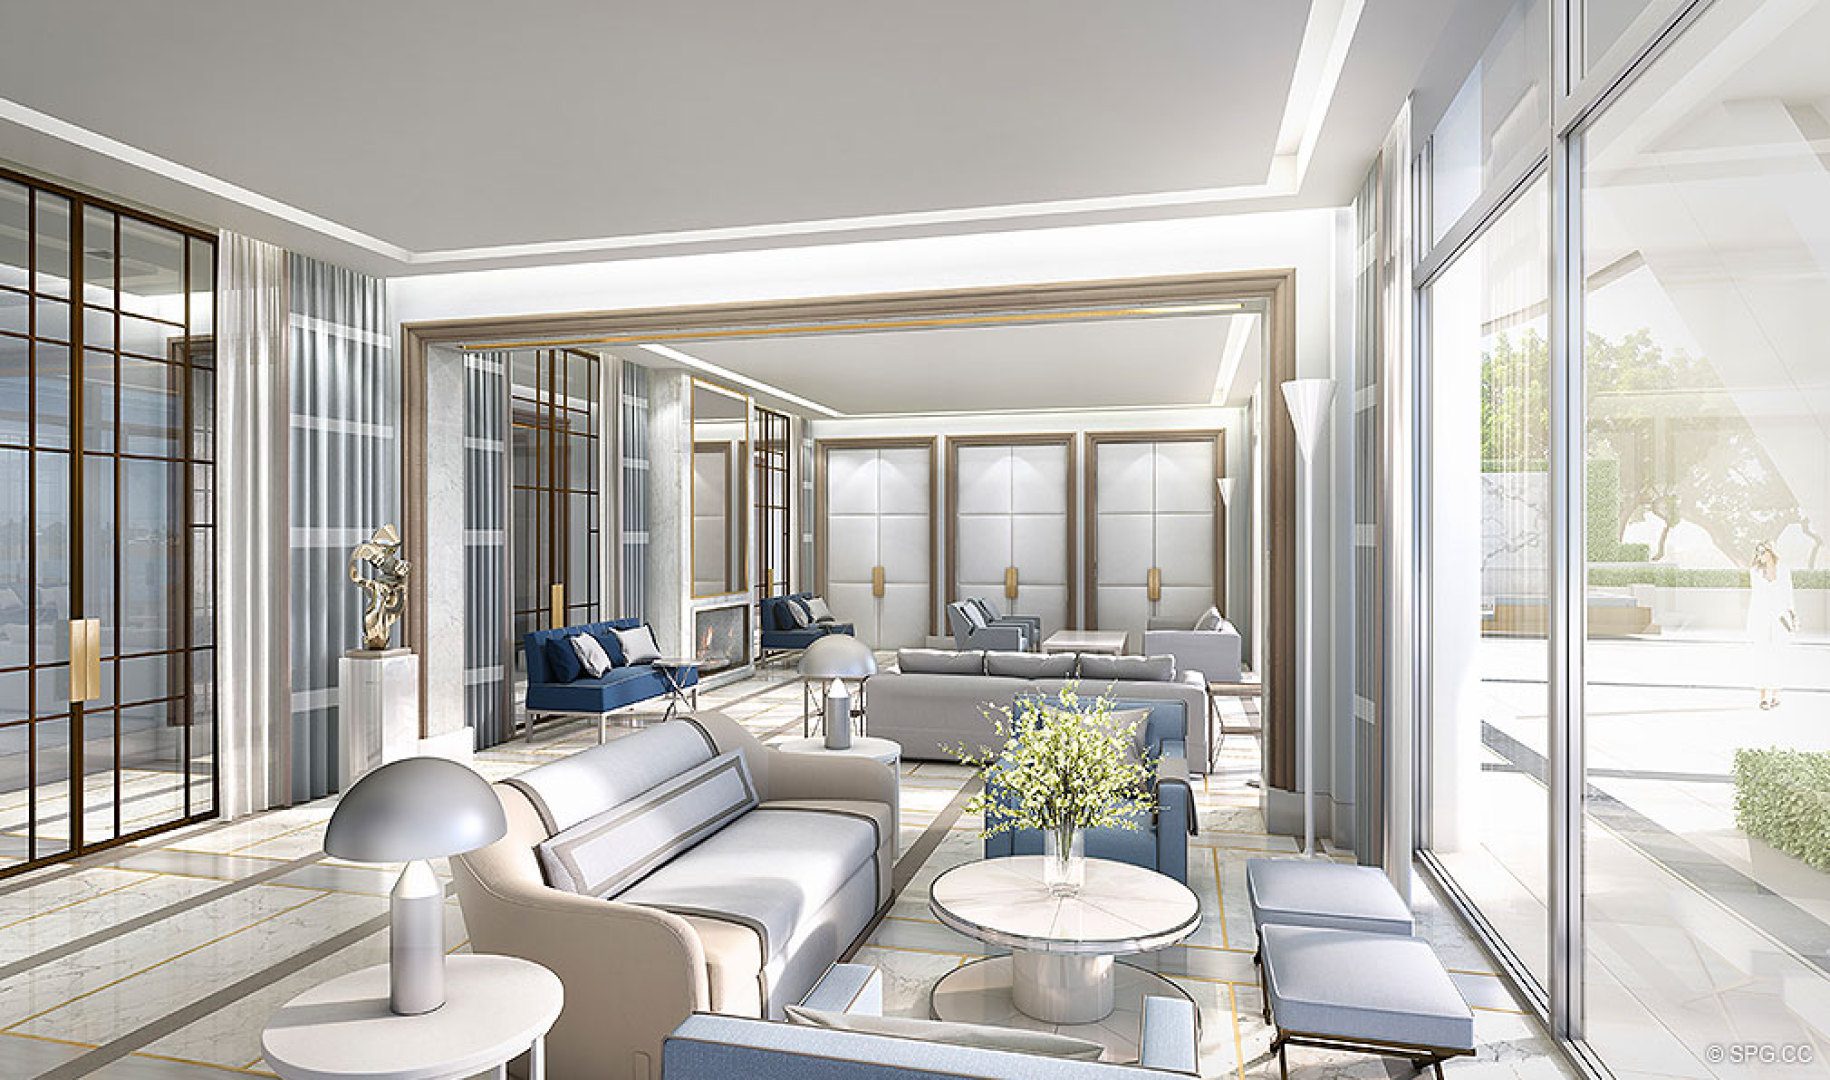 Club Lounge at The Bristol, Luxury Waterfront Condos in West Palm Beach, Florida 33401